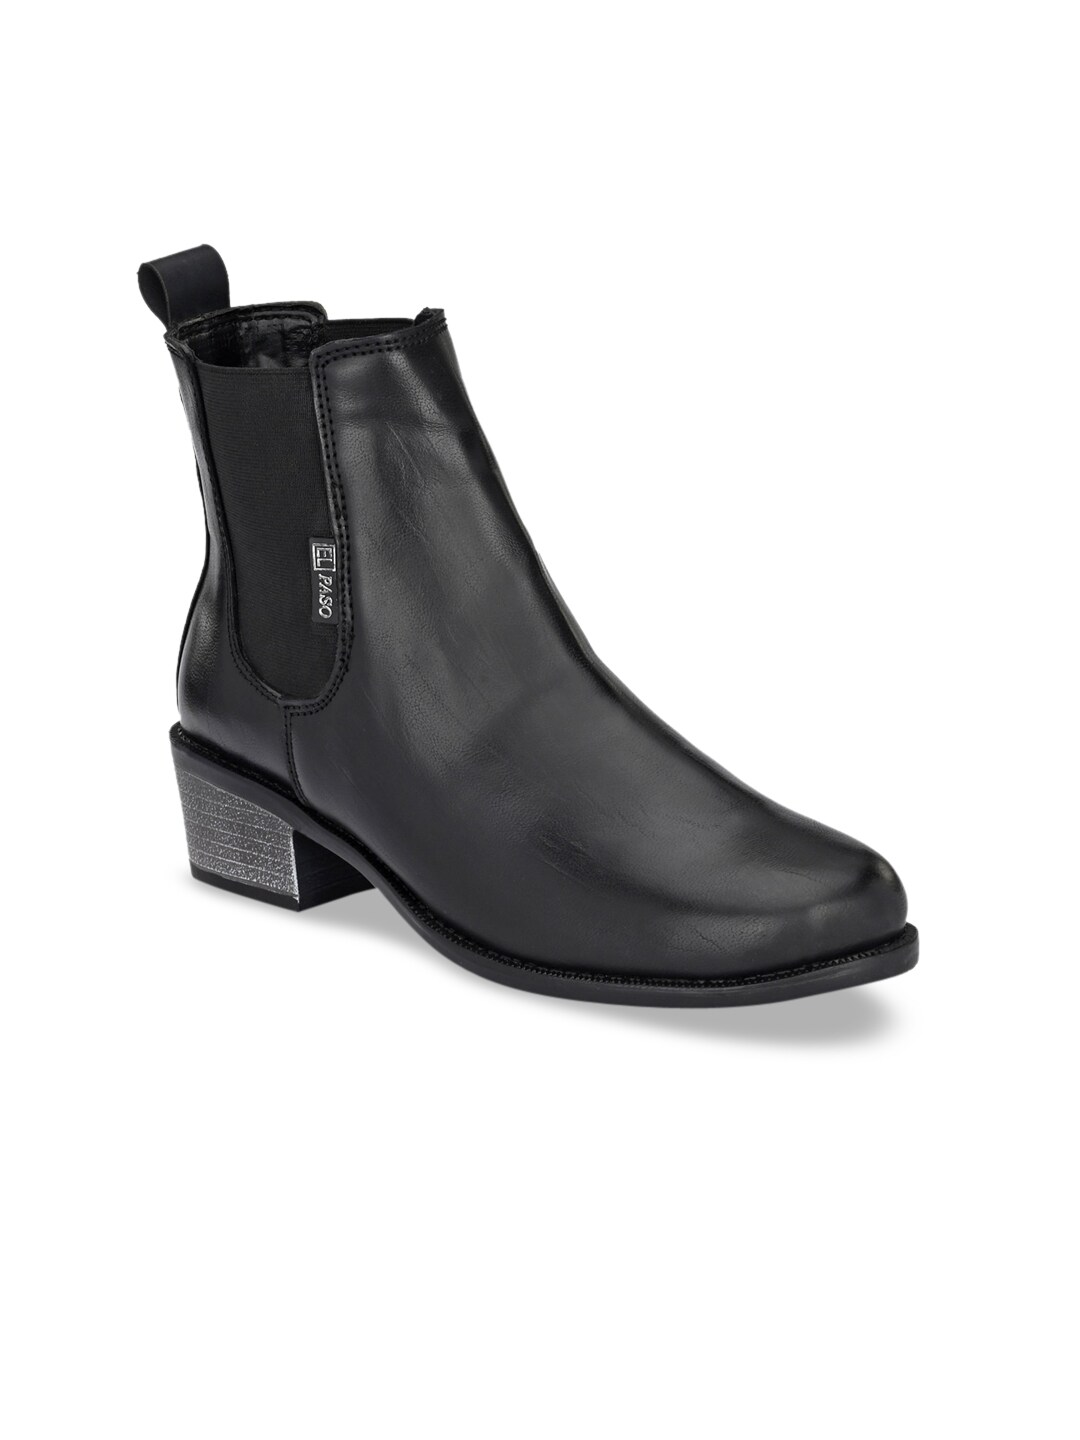 El Paso Women Black Solid High-Top Flat Boots Price in India